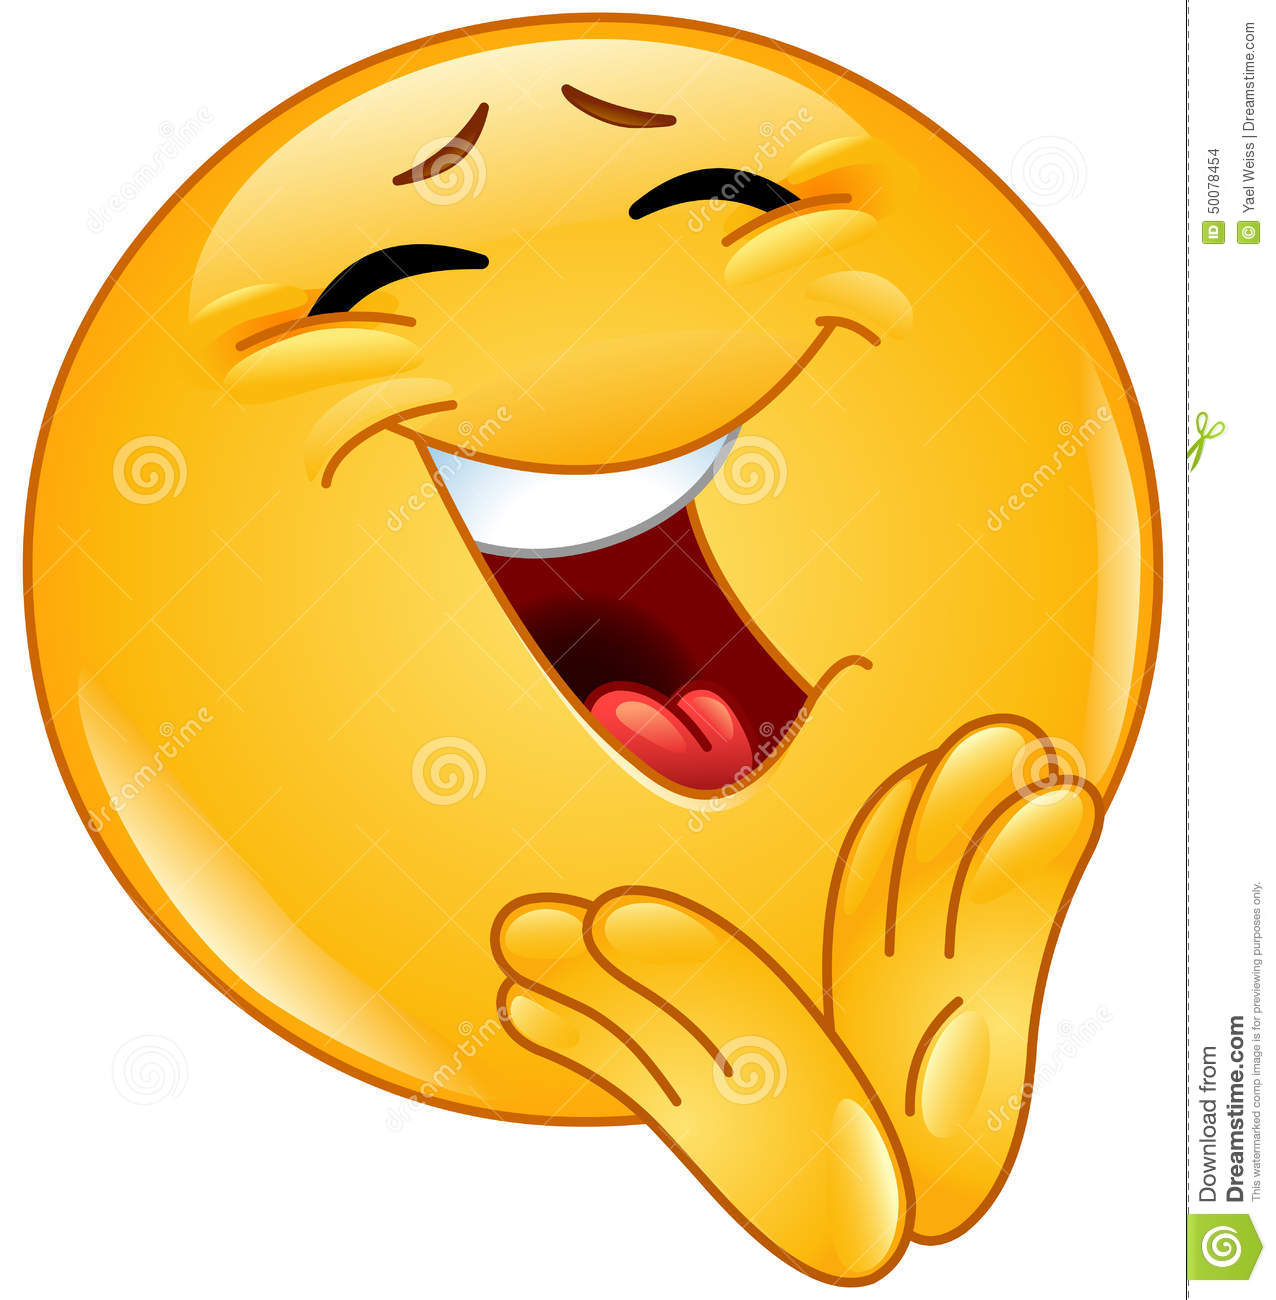 Clapping Cheerful Emoticon Stock Vector   Image  50078454